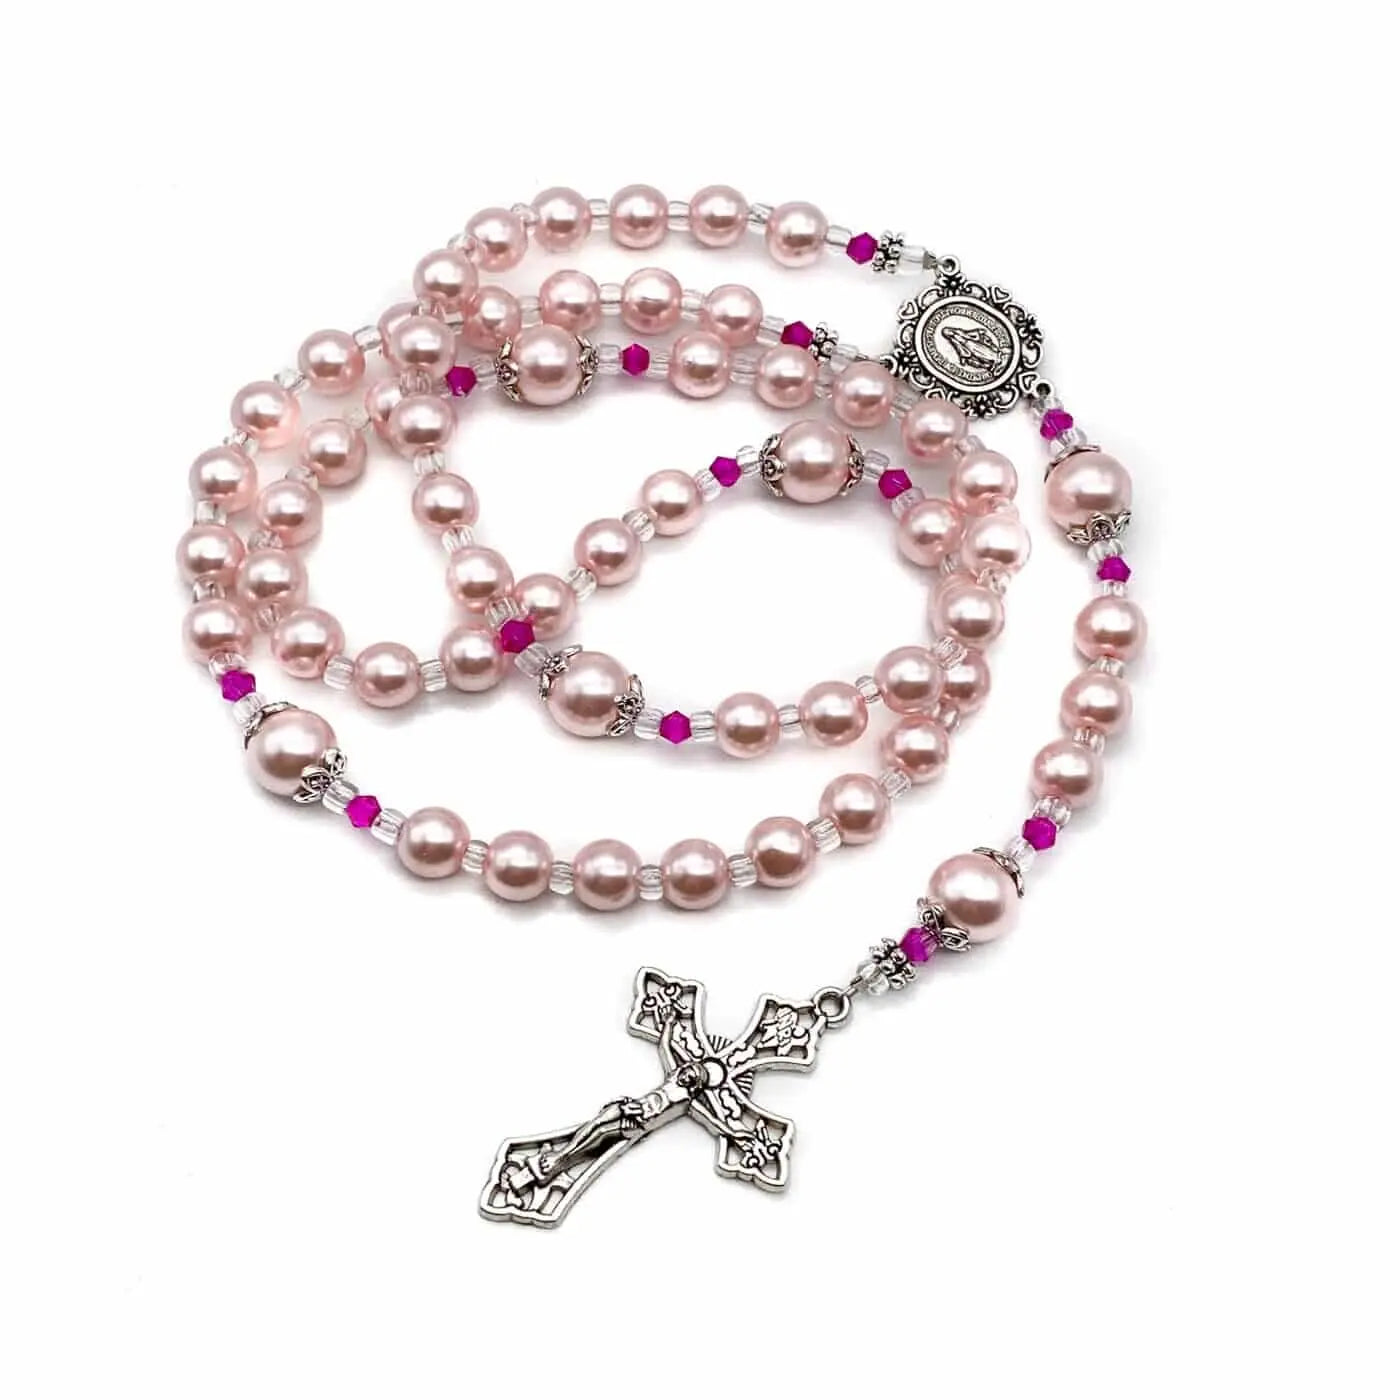 Pink Pearl Beads Rosary Catholic Necklace Miraculous Medal Cross Crucifix 